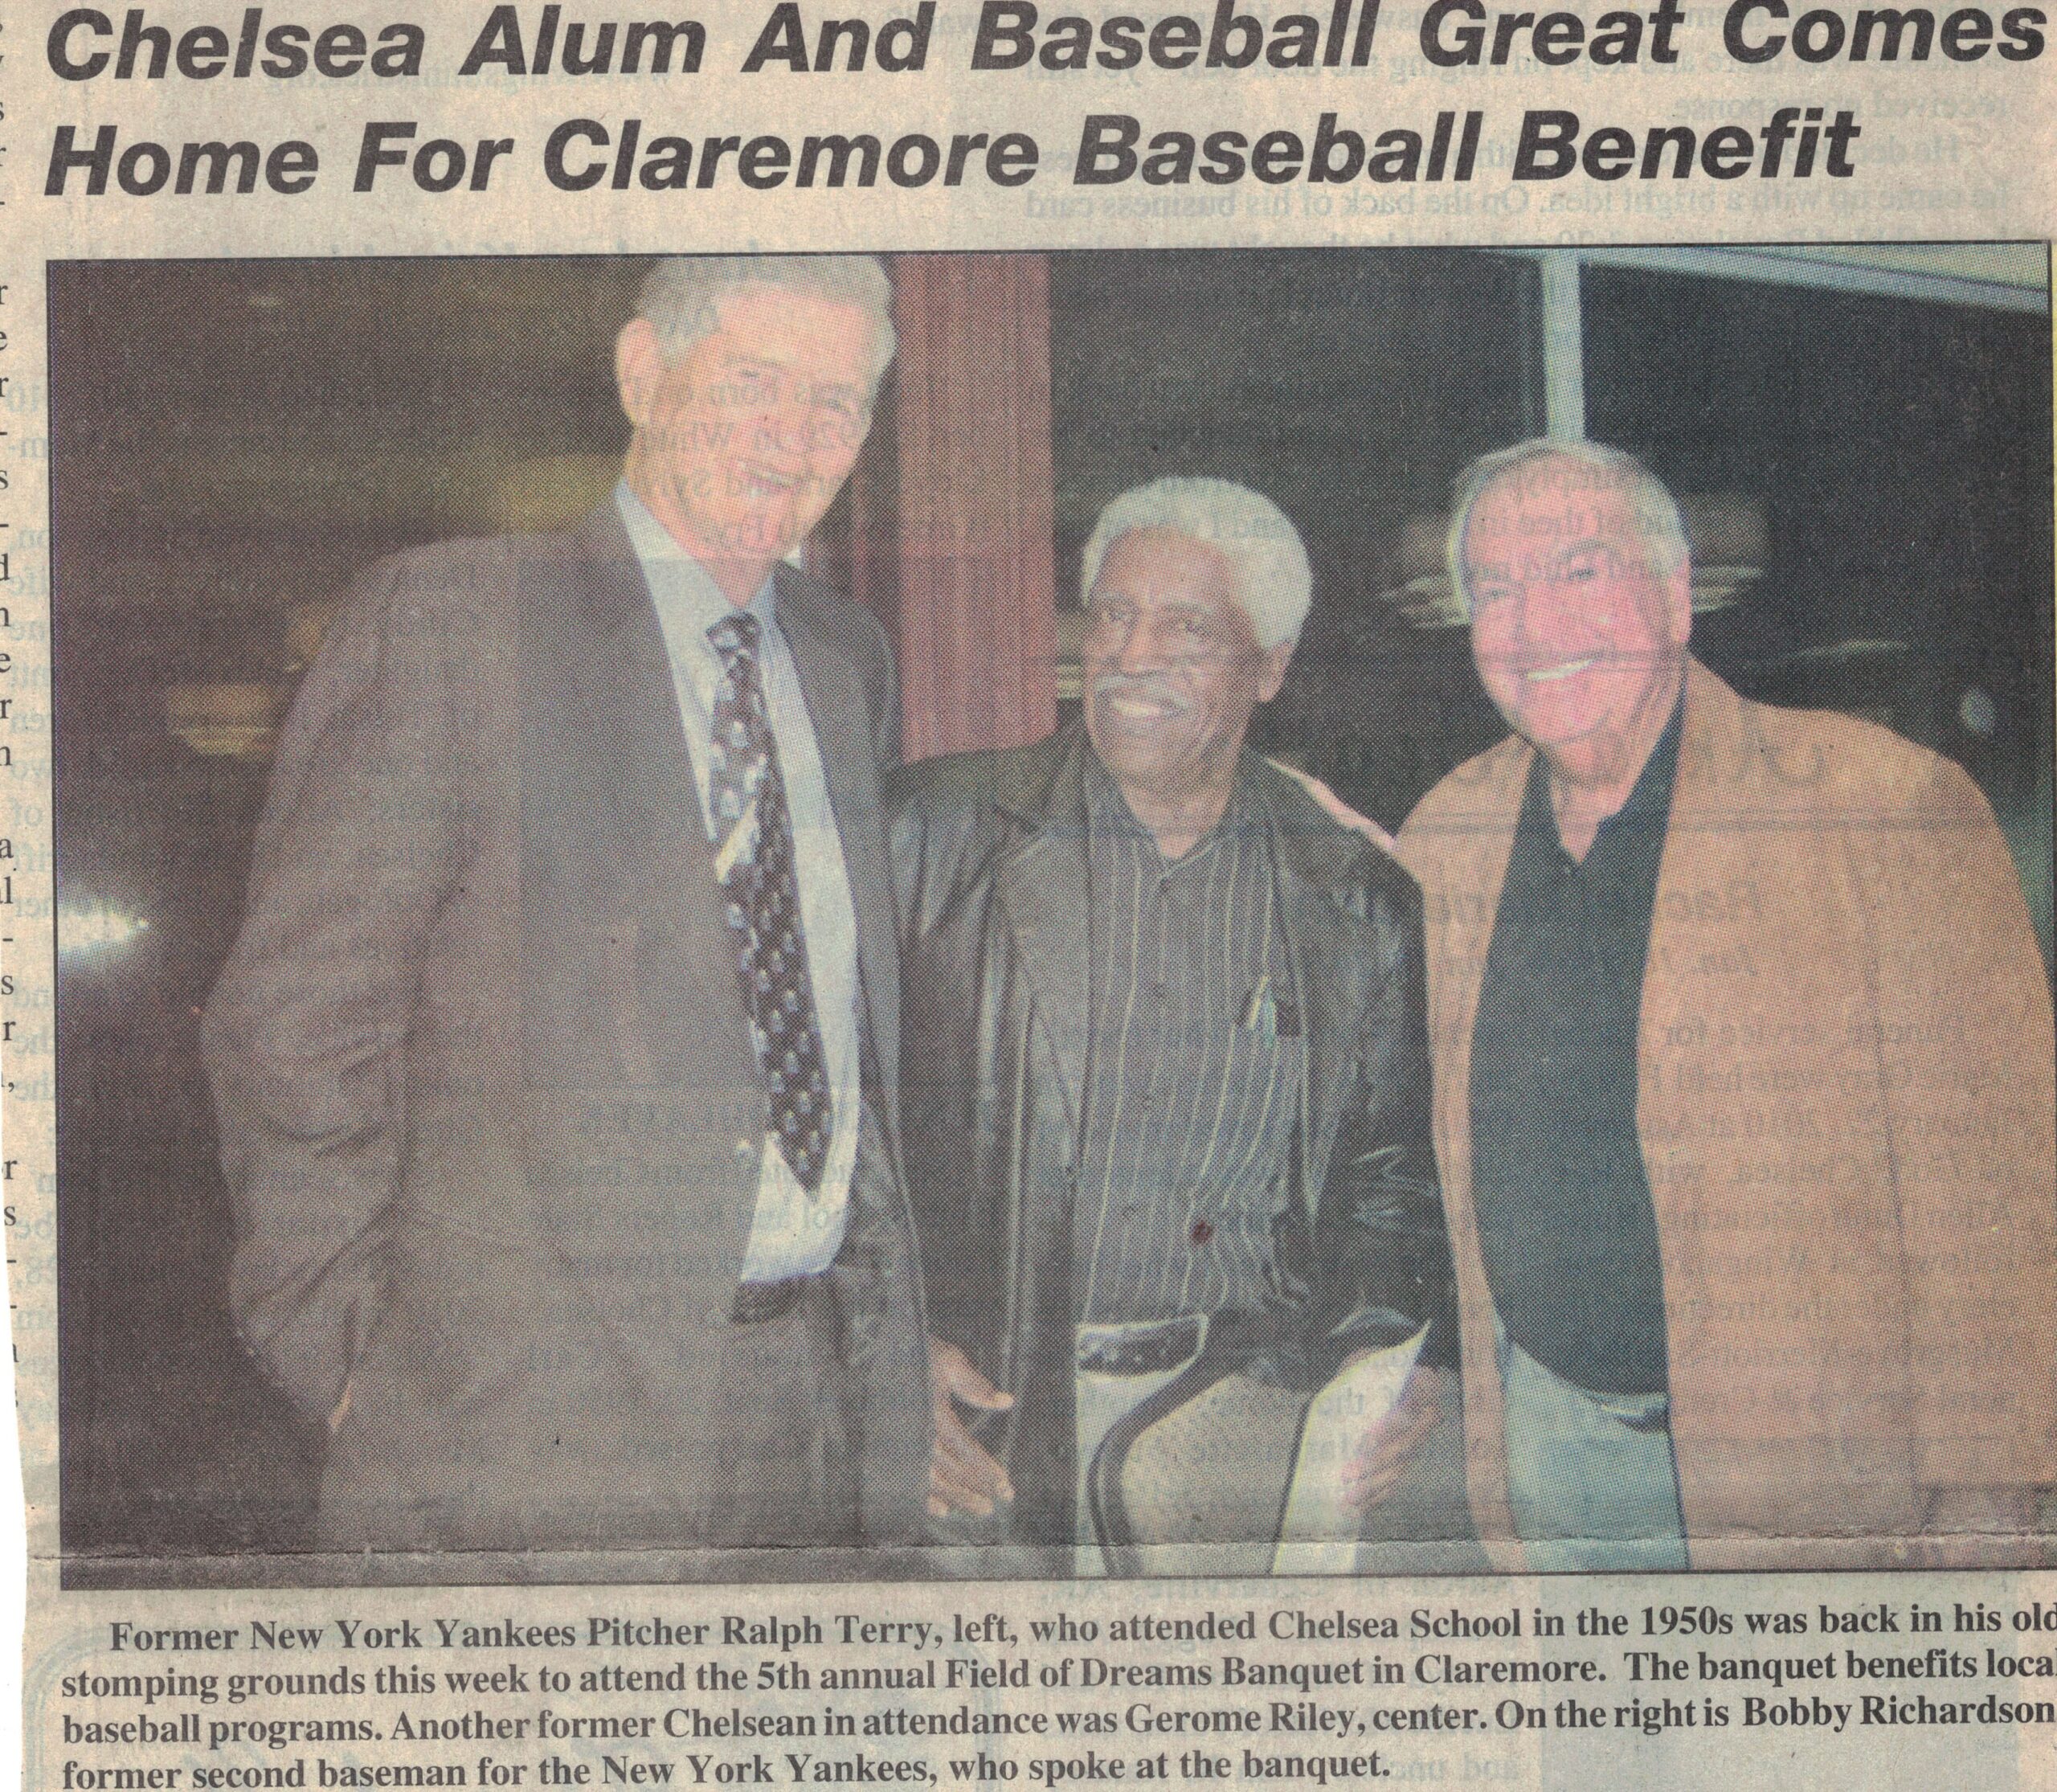 Picture of three men standing together with article title overhead and caption below.